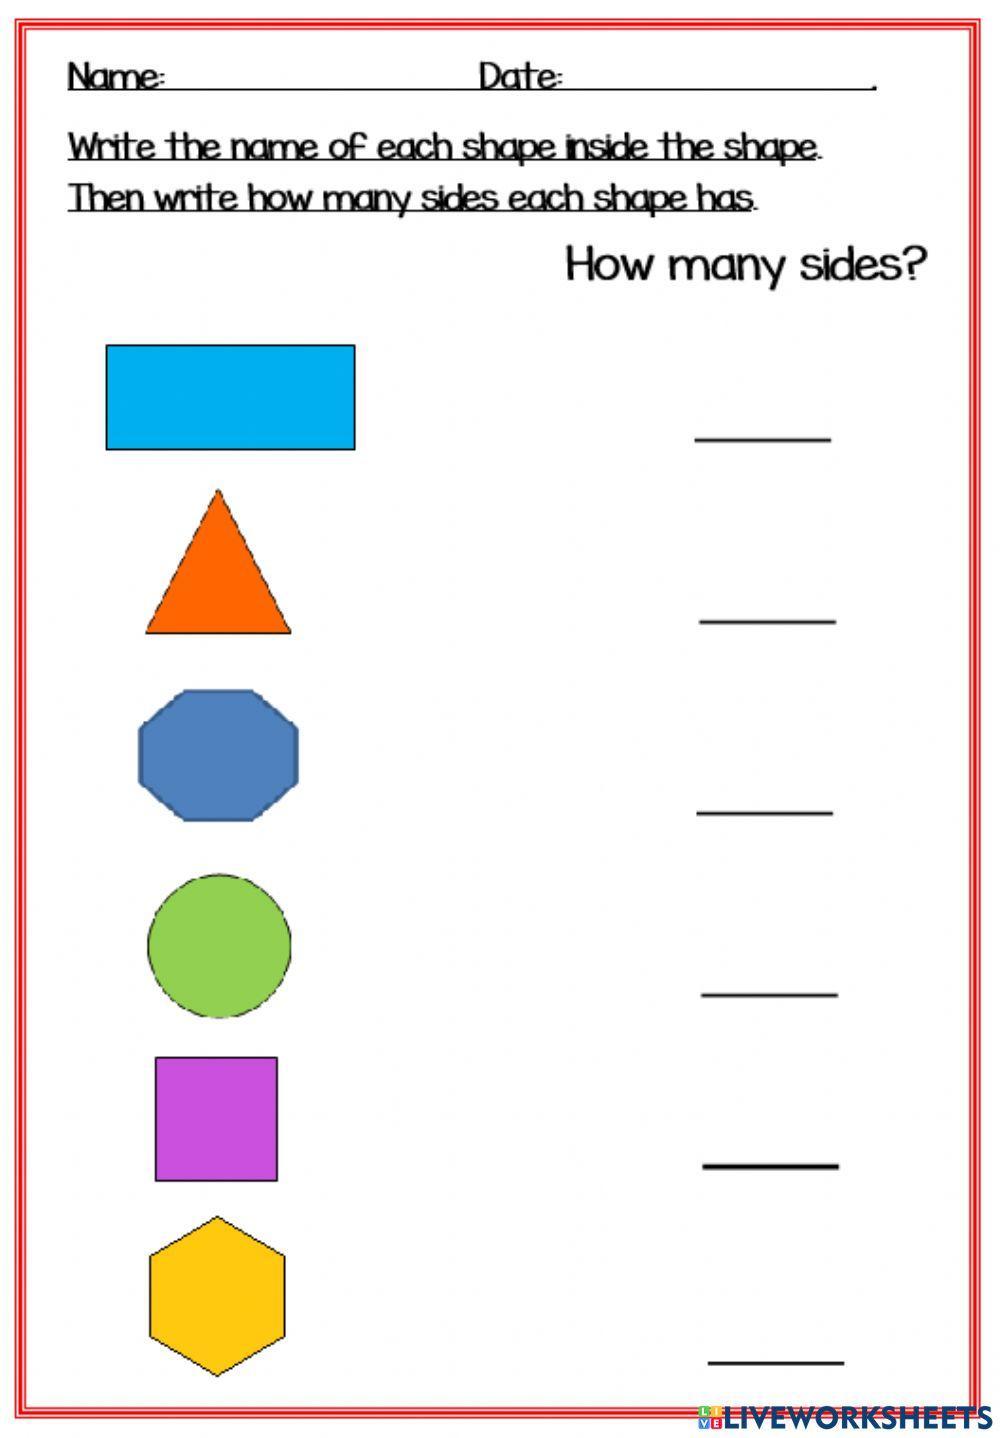 Flat Shapes 2D - names and sides